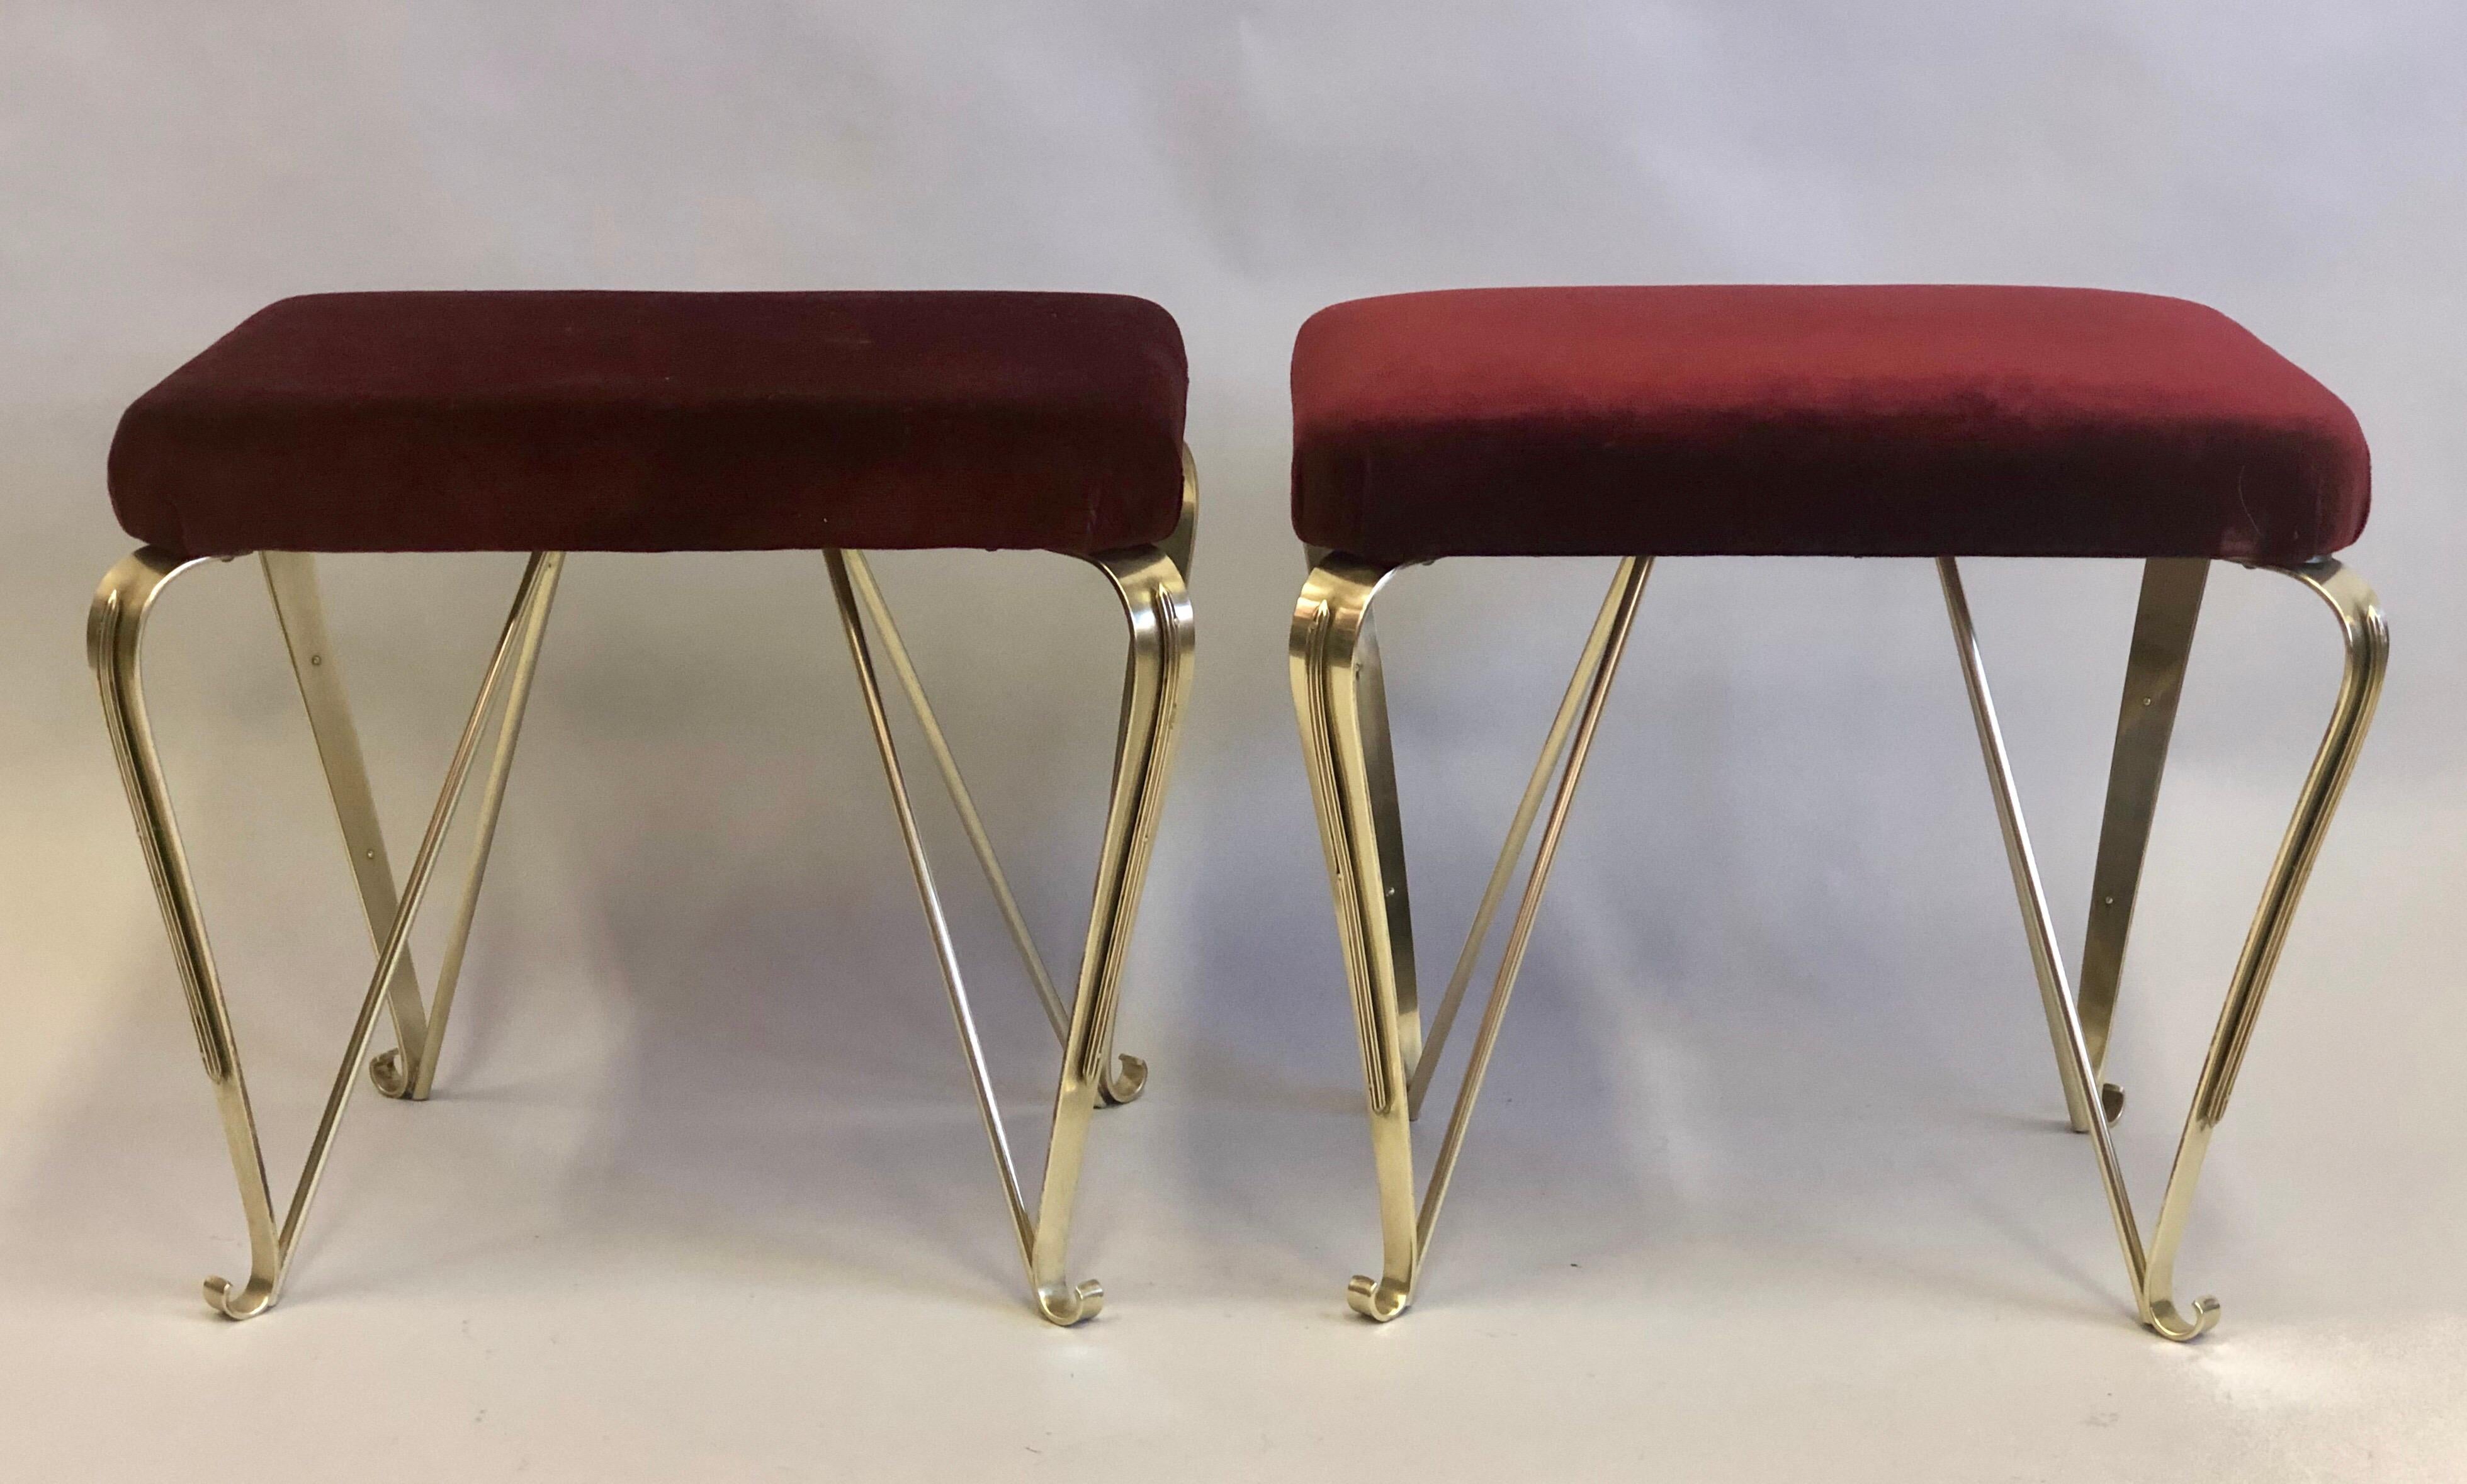 Pair of Italian Mid-Century Modern Neoclassical Solid Brass Benches by Jansen In Good Condition For Sale In New York, NY